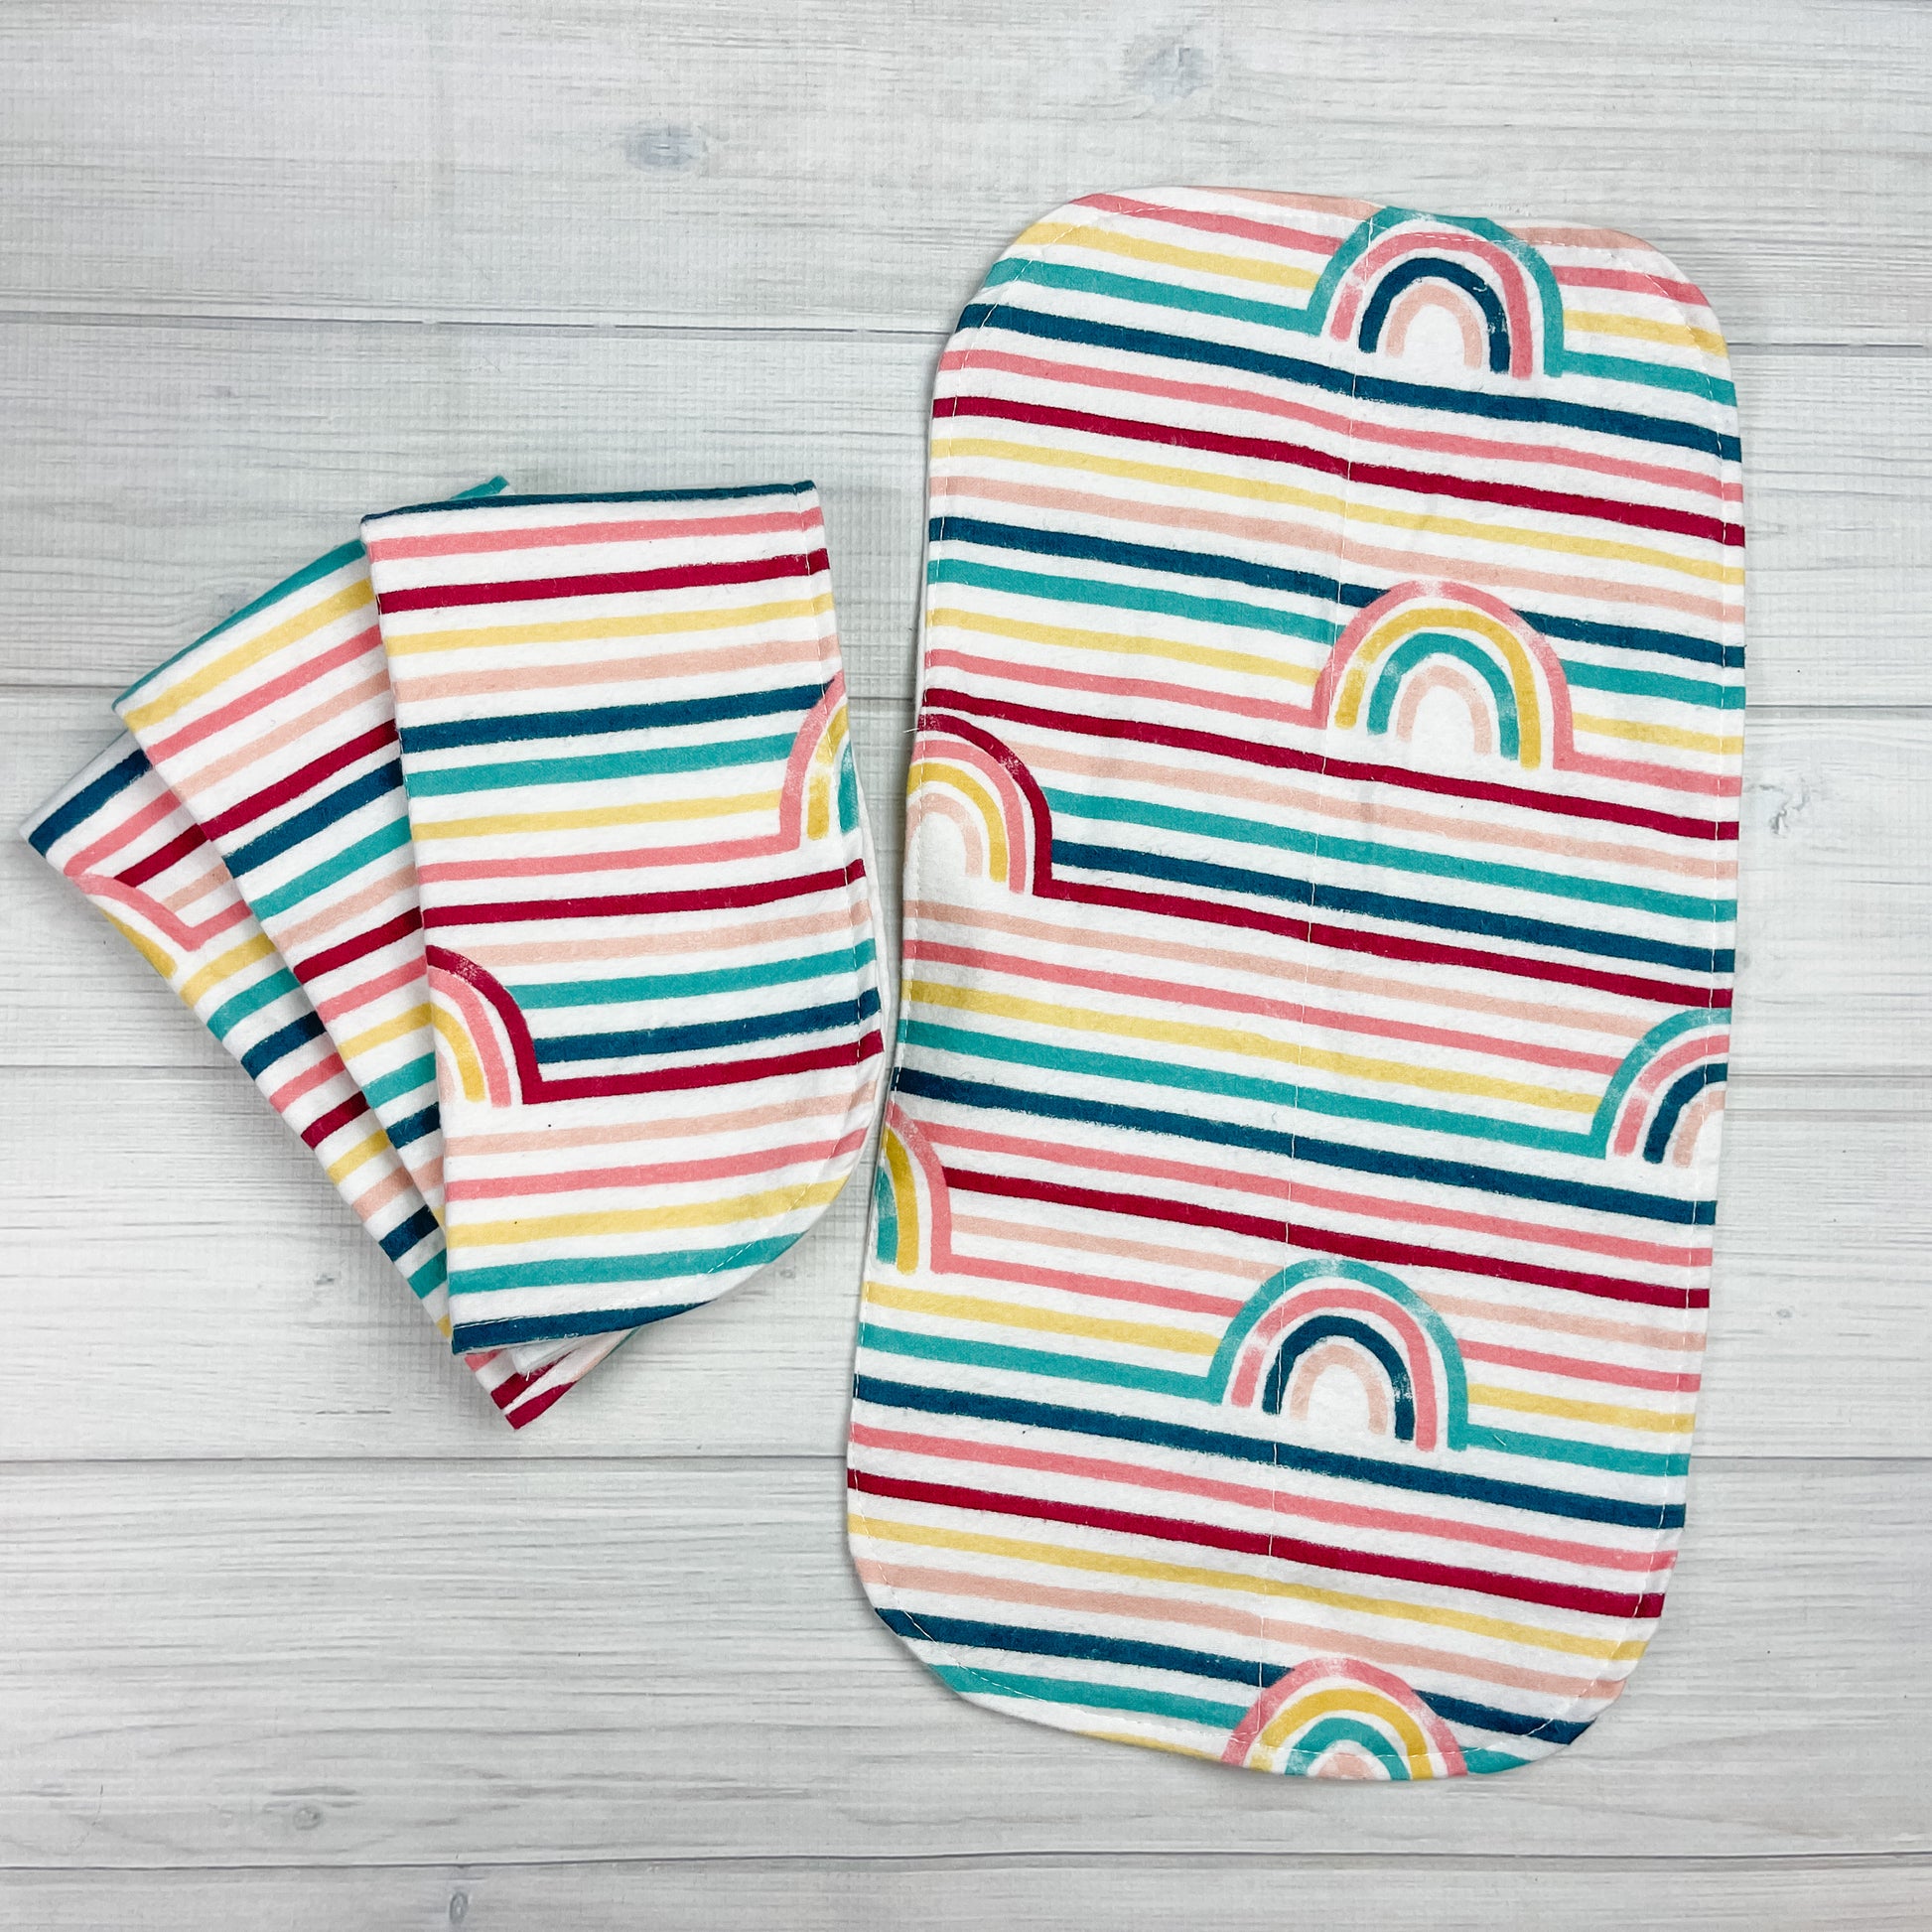 rainbow stripped flannel burp cloths. colors include: teal, navy blue, pink, coral, yellow, maroon 